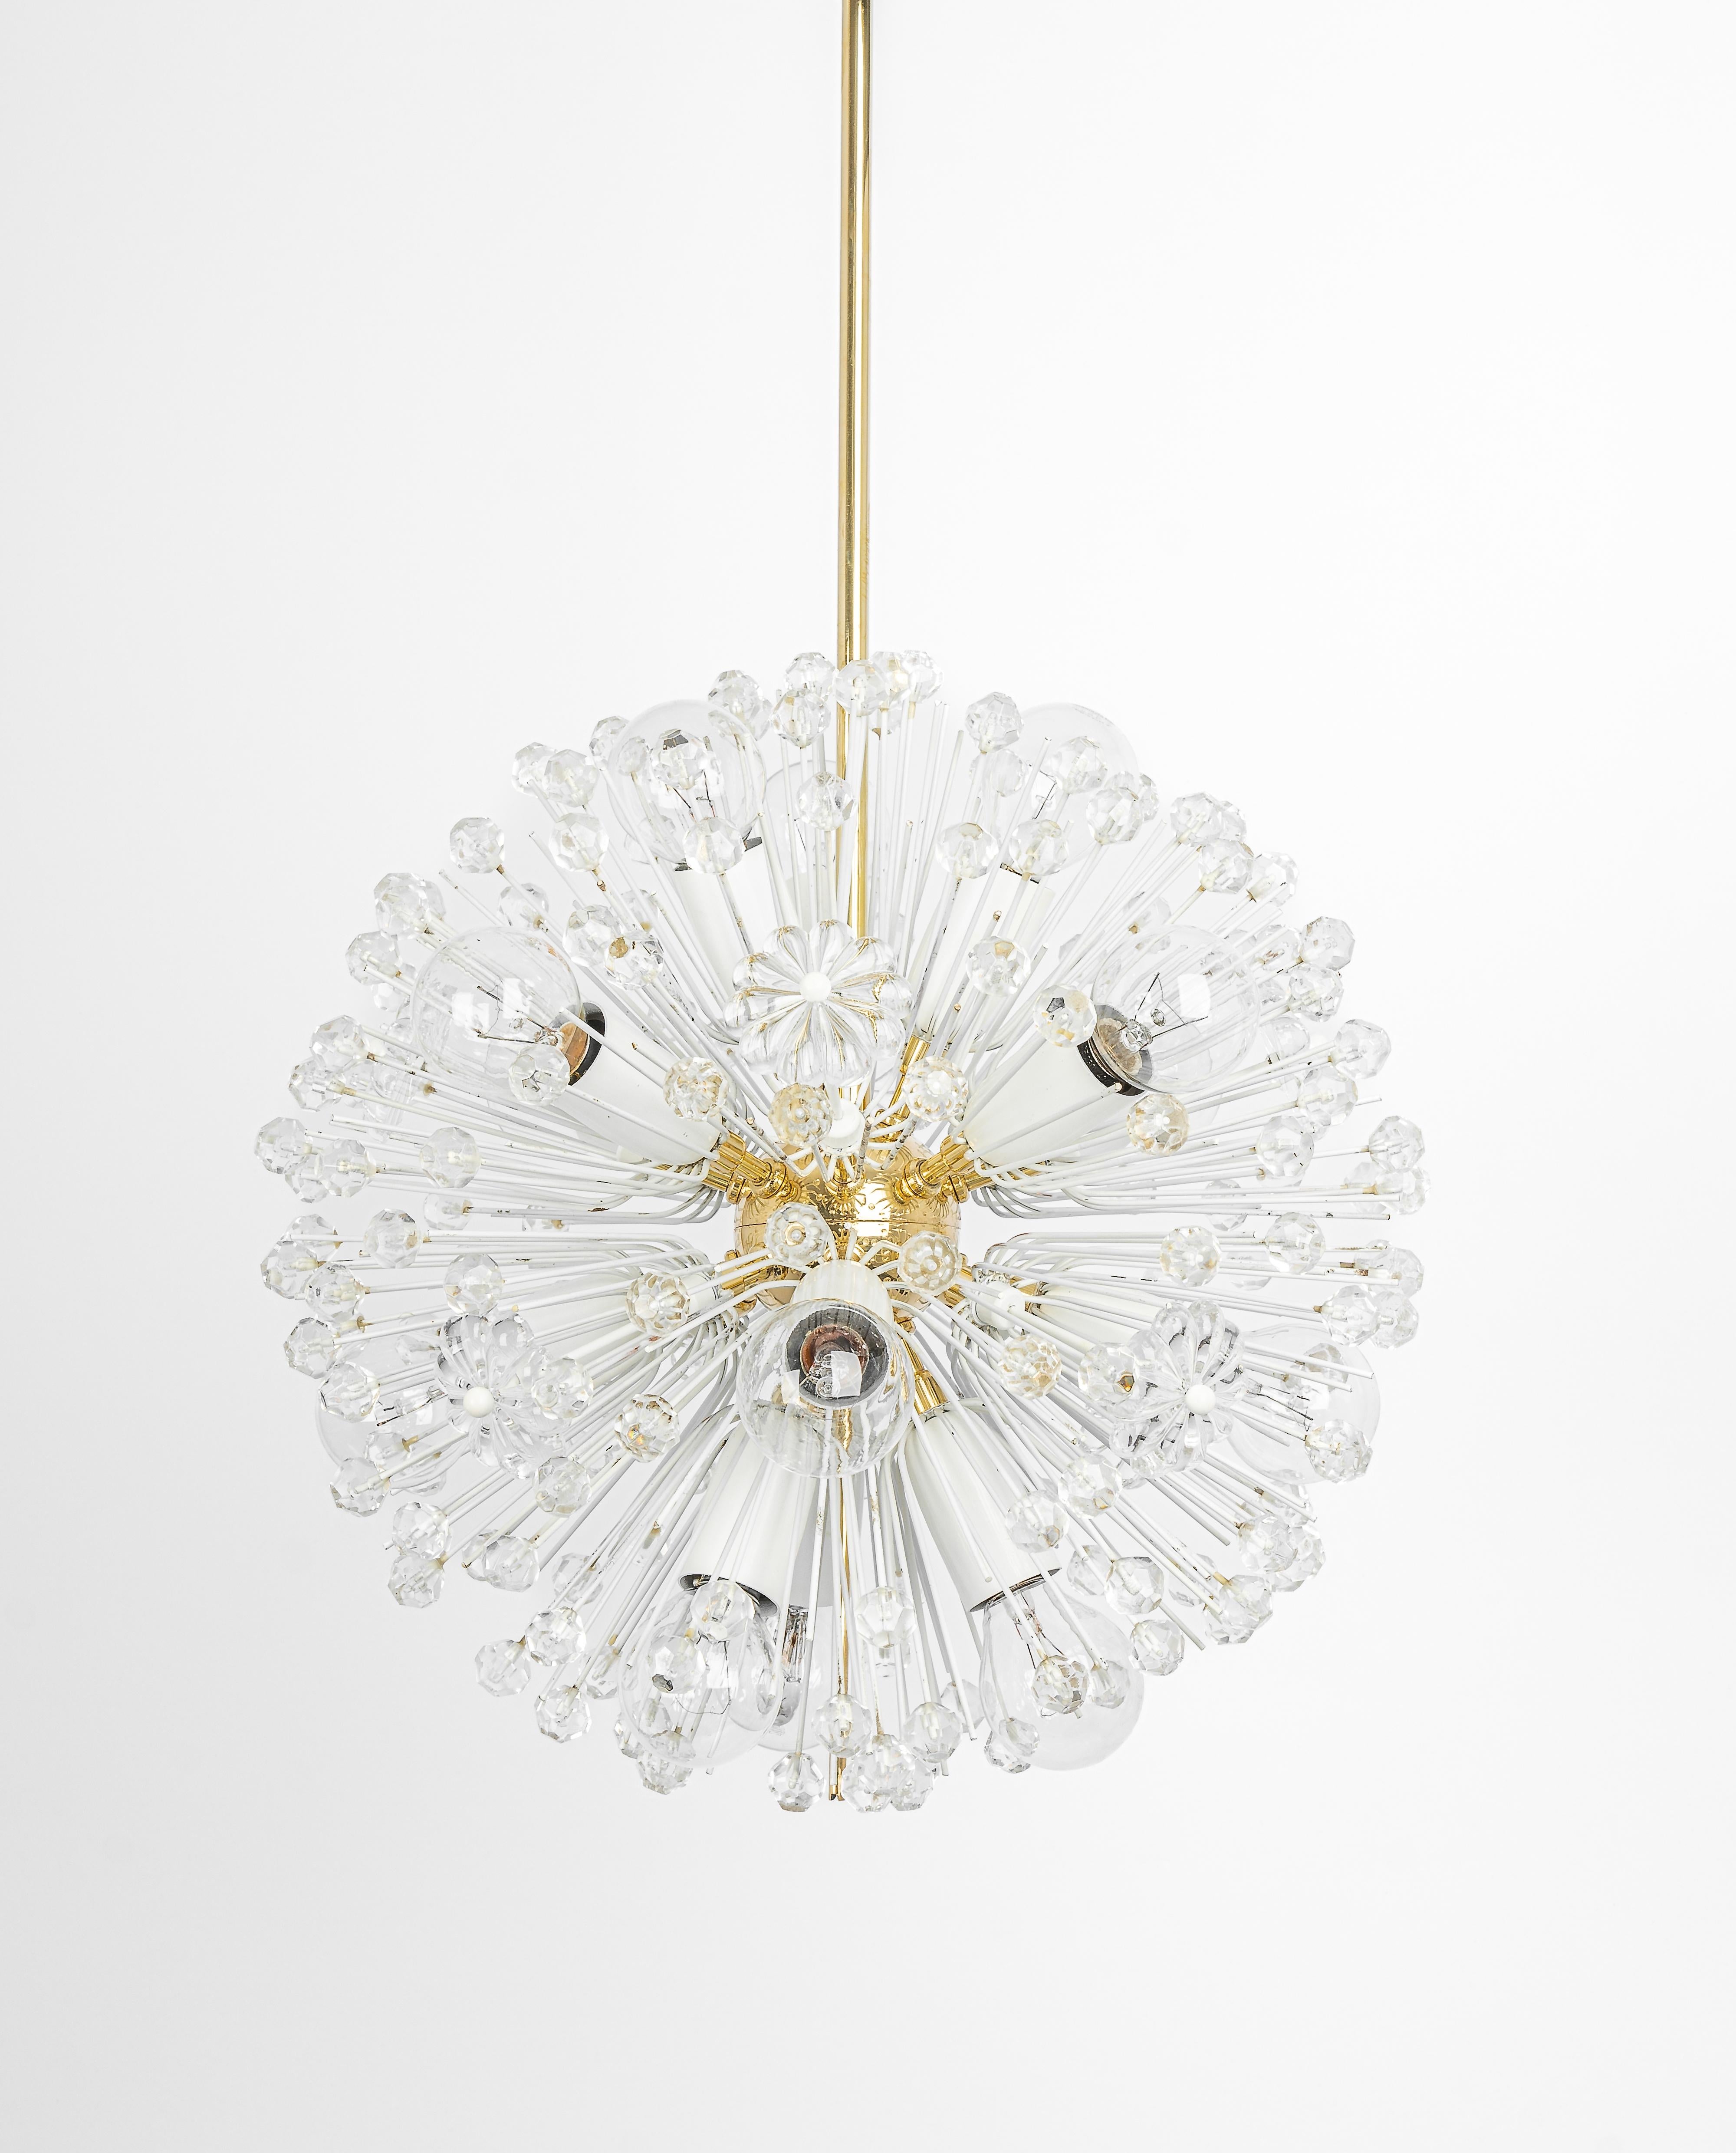 1 of 3 Beautiful petite starburst brass pendant light with hundreds of crystals designed by Emil Stejnar for Nikoll, manufactured in Austria, circa 1960s.

Heavy quality and in good condition with small signs of age.
Cleaned, well-wired and ready